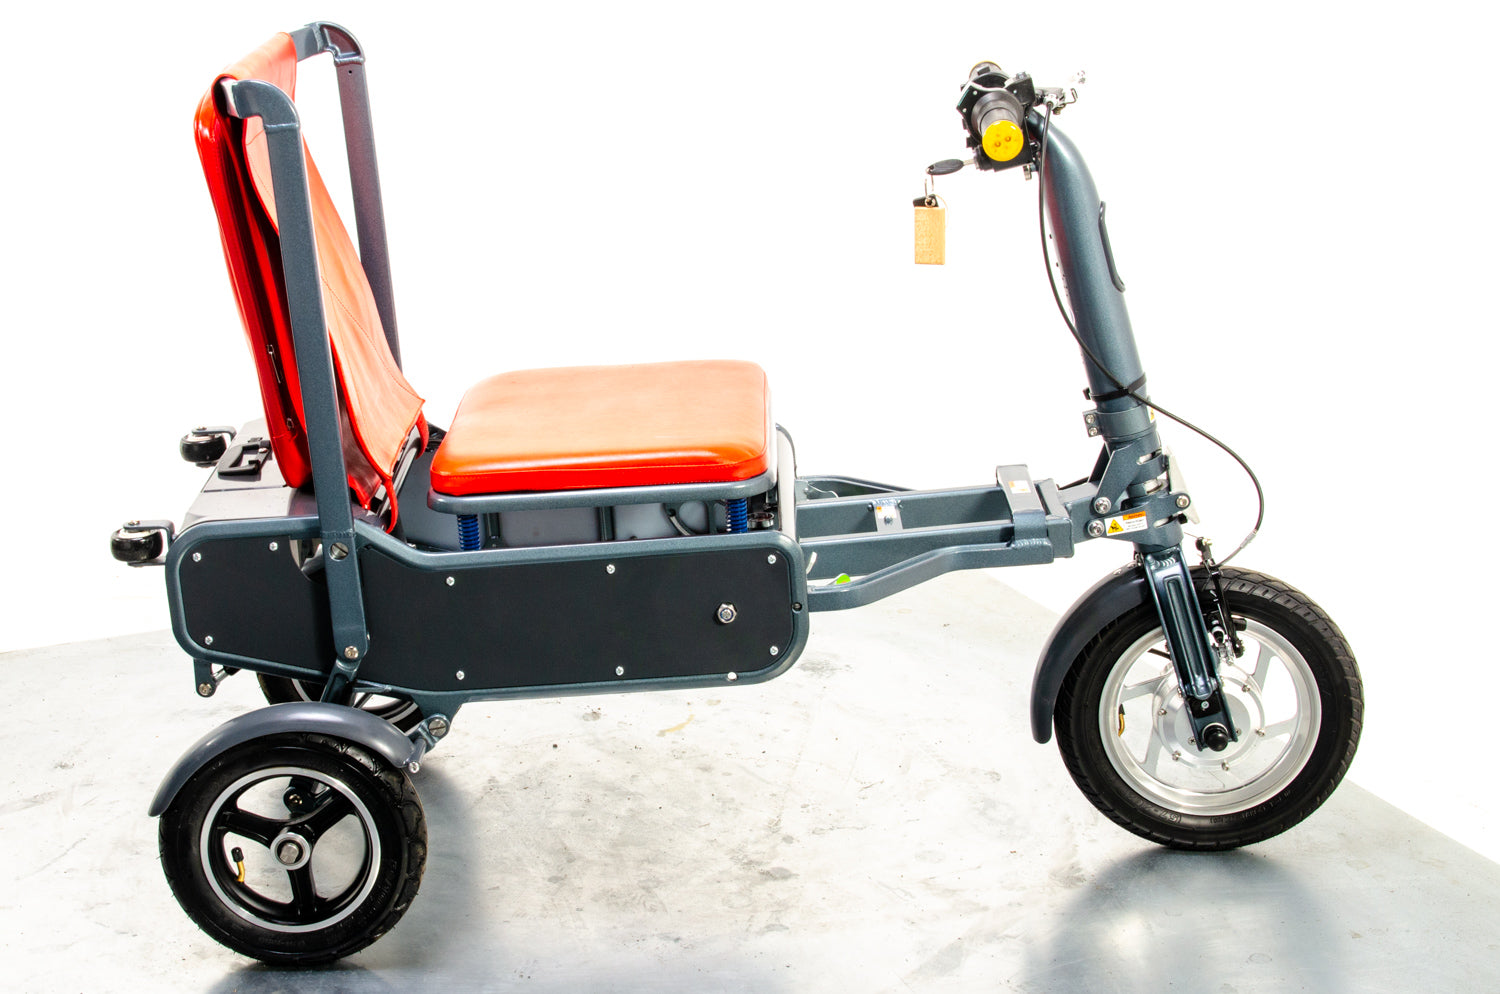 eFOLDI Lightweight Folding Electric Mobility Scooter 8mph Used Portable Transportable Lithium